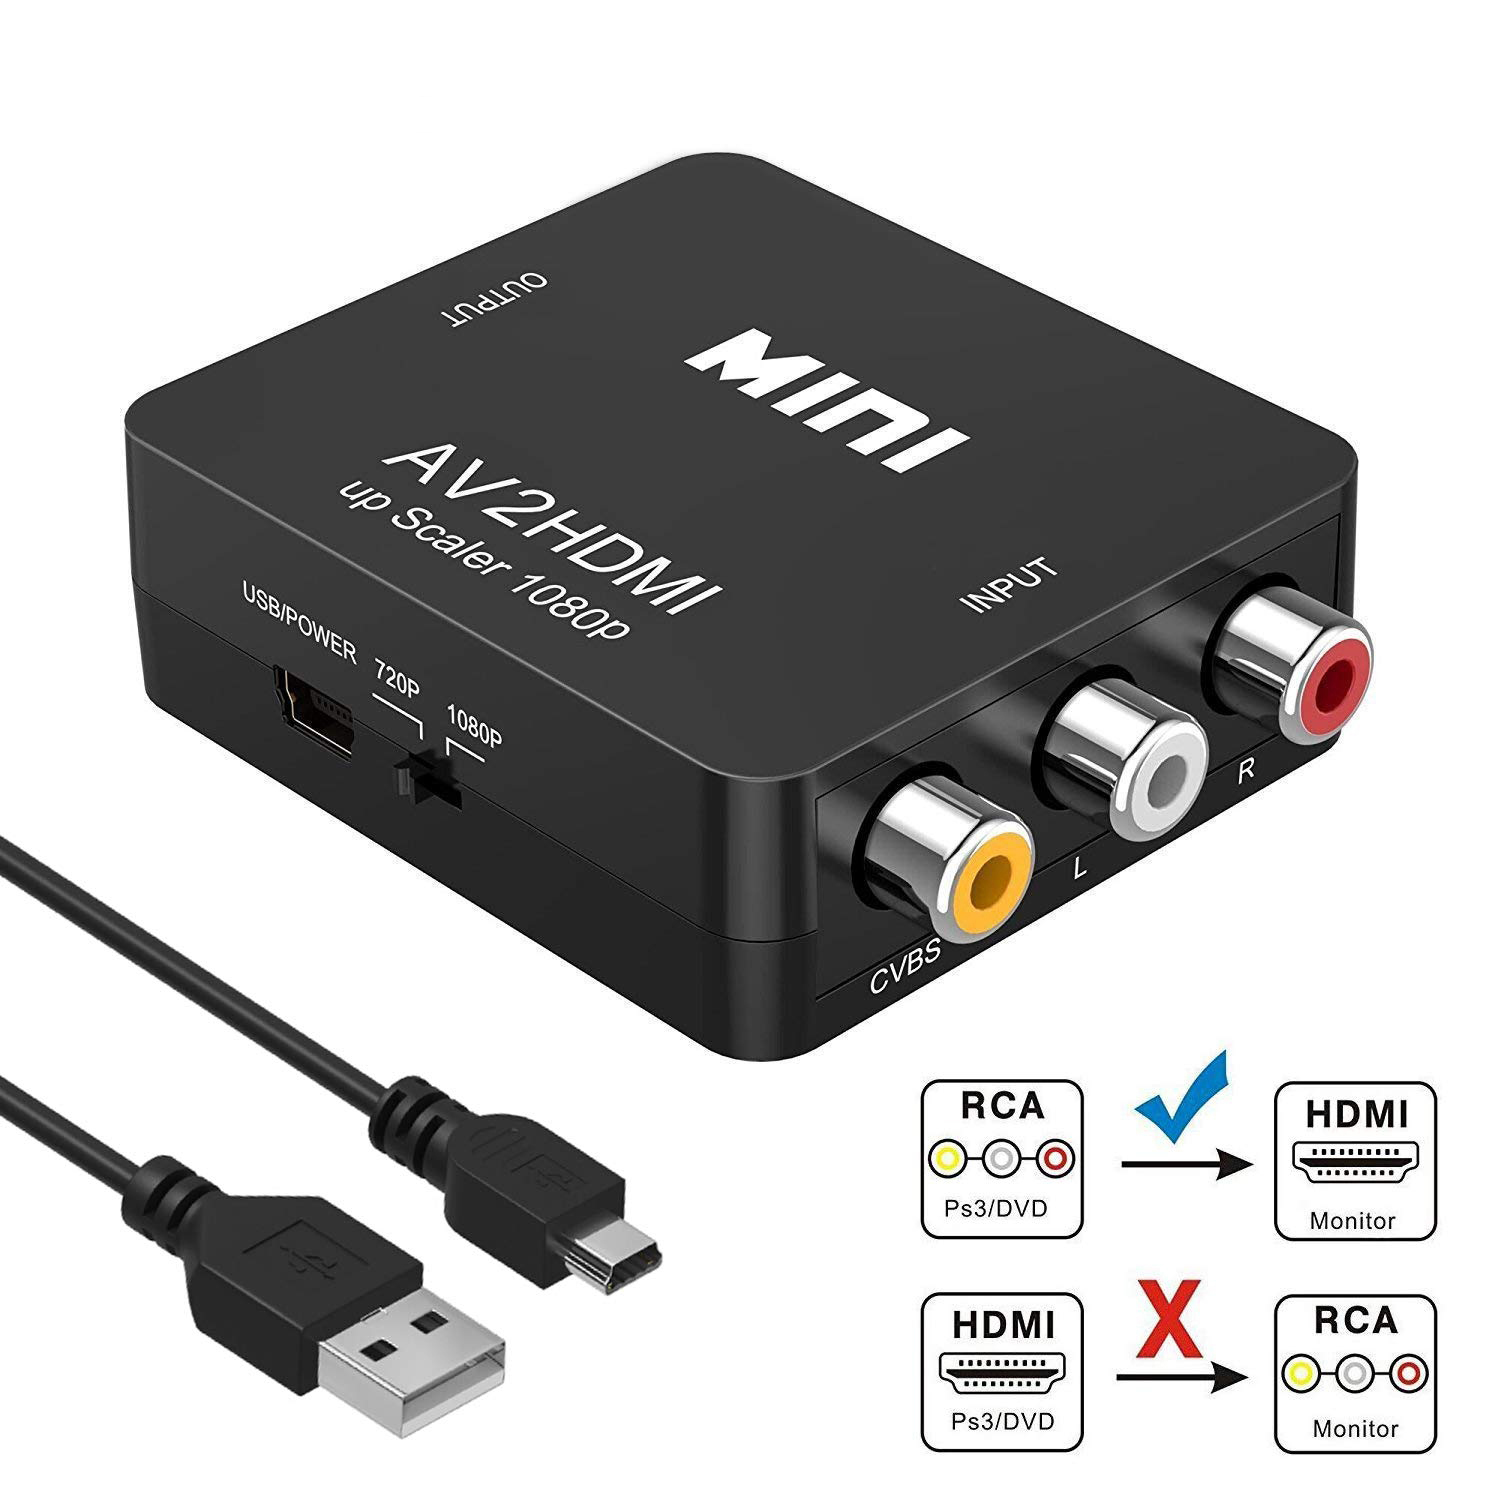 RCA to HDMI, Coolmade 1080P Mini RCA Composite CVBS AV to HDMI Video Audio Converter Adapter Supporting PAL/NTSC with USB Charge Cable for PC Laptop Xbox PS4 PS3 TV STB VHS VCR Camera DVD - image 1 of 8